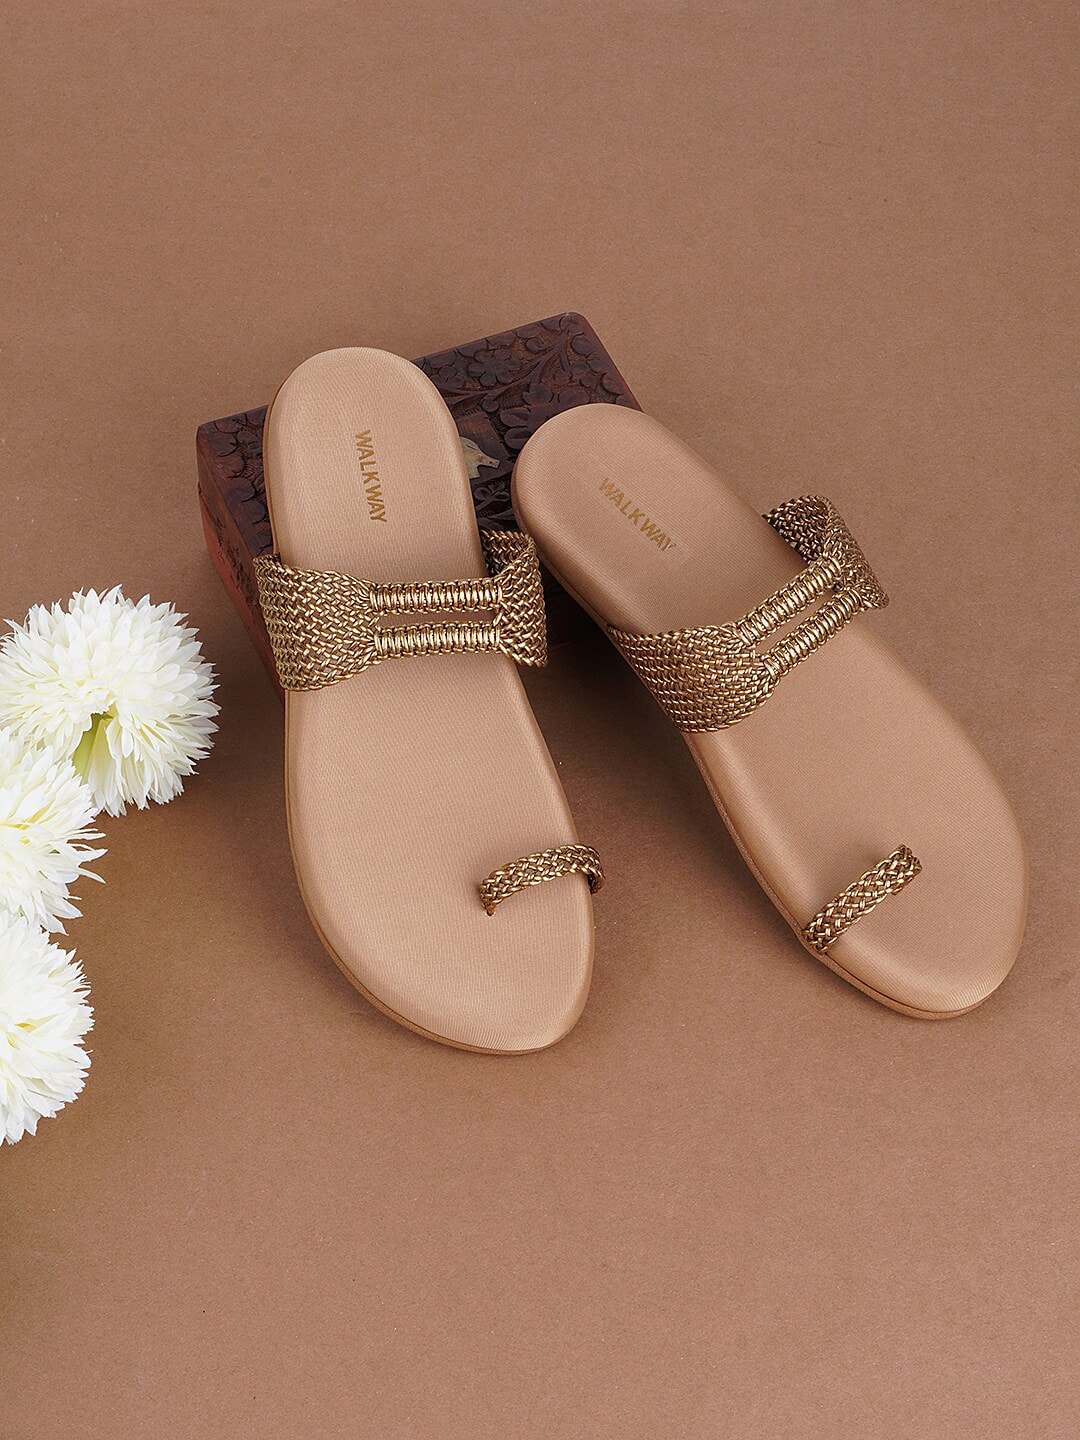 WALKWAY by Metro Textured One Toe Flats Price in India